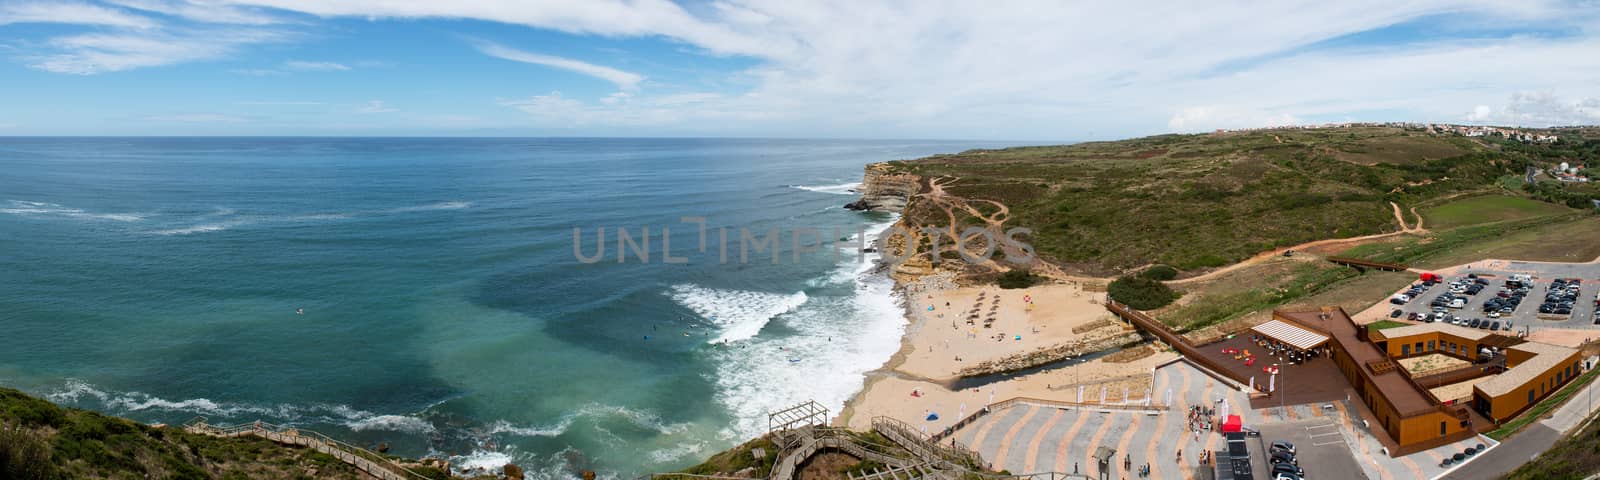 ERICEIRA, PORTUGAL - SEPTEMBER 7 2014: Ribeira d'Ilhas beach at Ericeira, Portugal is a popular destination for  tourists and surfers.